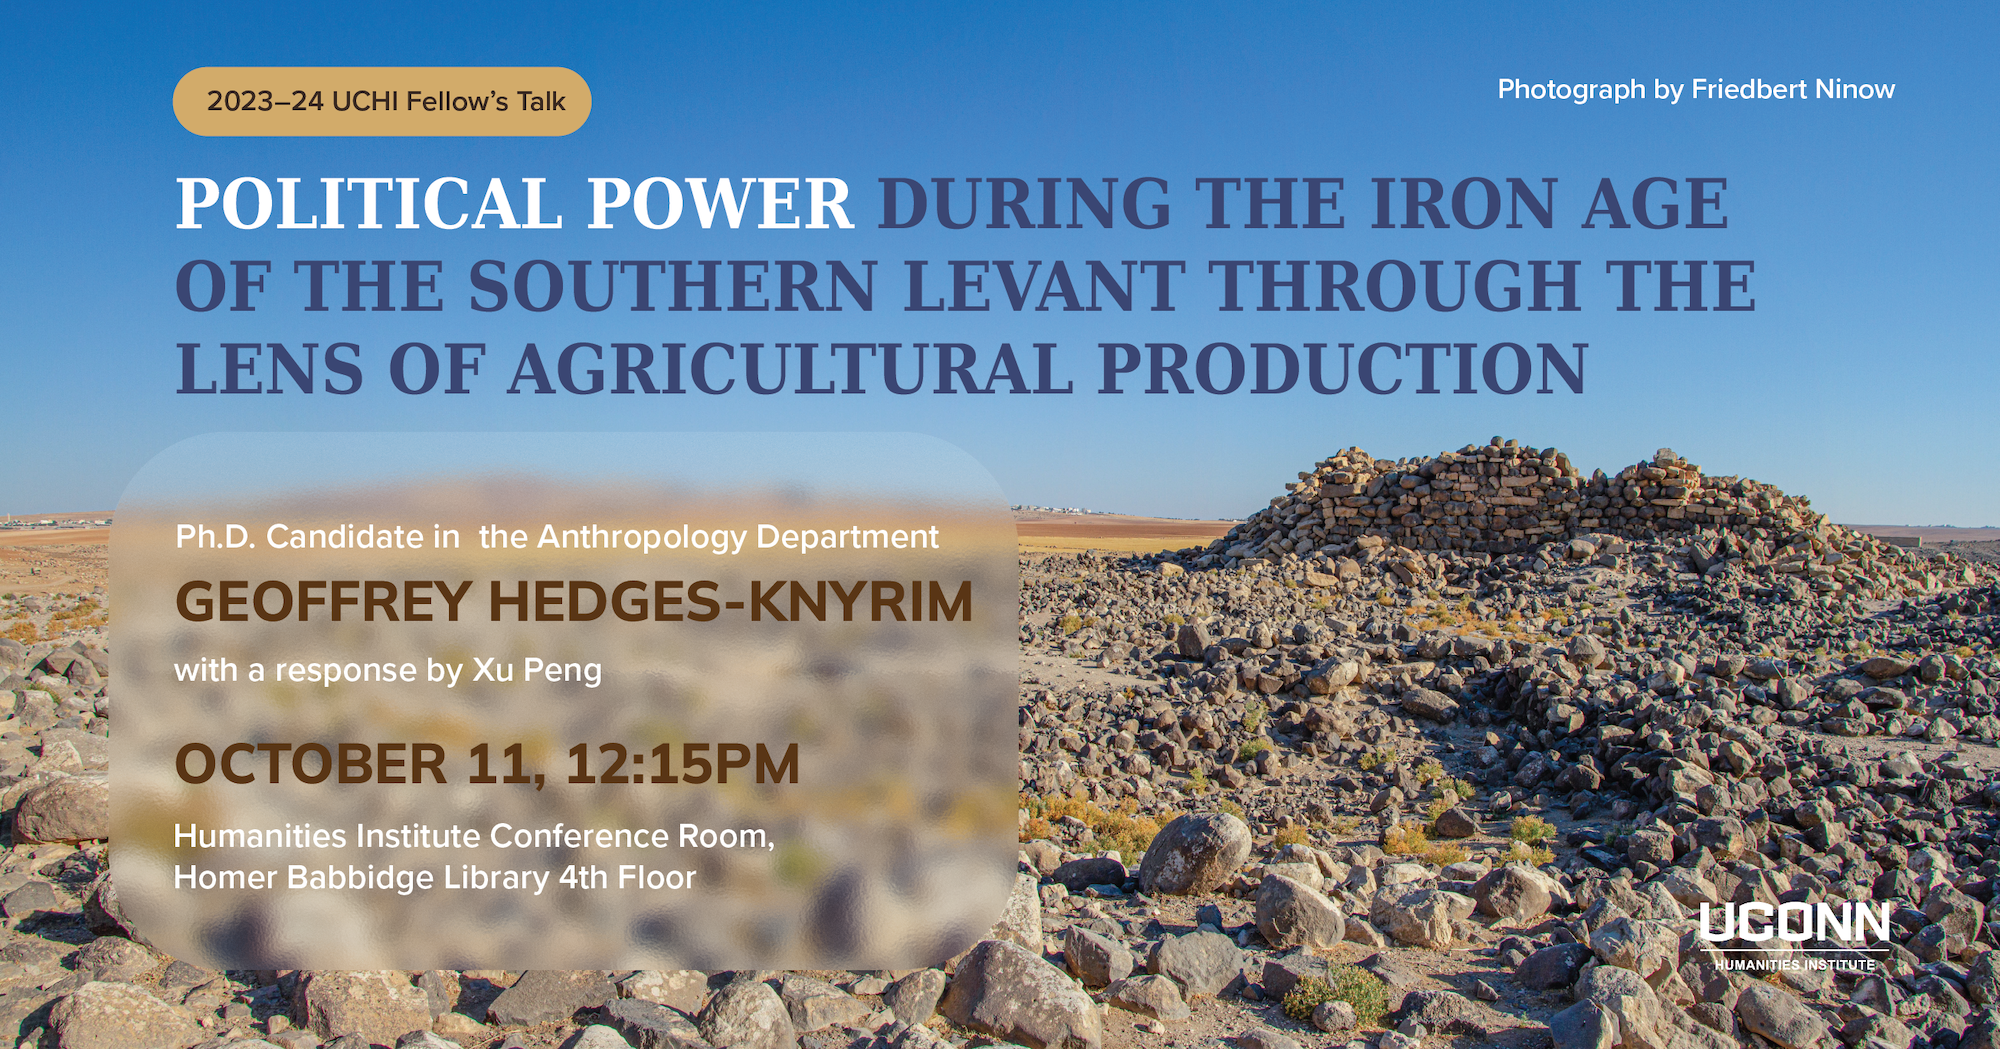 2023–23 UCHI fellow's talk. Political Power during the Iron Age of the Southern Levant Through the Lens of Agricultural Production. Ph.D Candidate, Anthrpology department, Geoffrey Hedges-Knyrim. with a response by Xu Pen. October 11, 12:15pm. Humanities Institute Conference Room. Homer Babbidge Library 4th Floor.